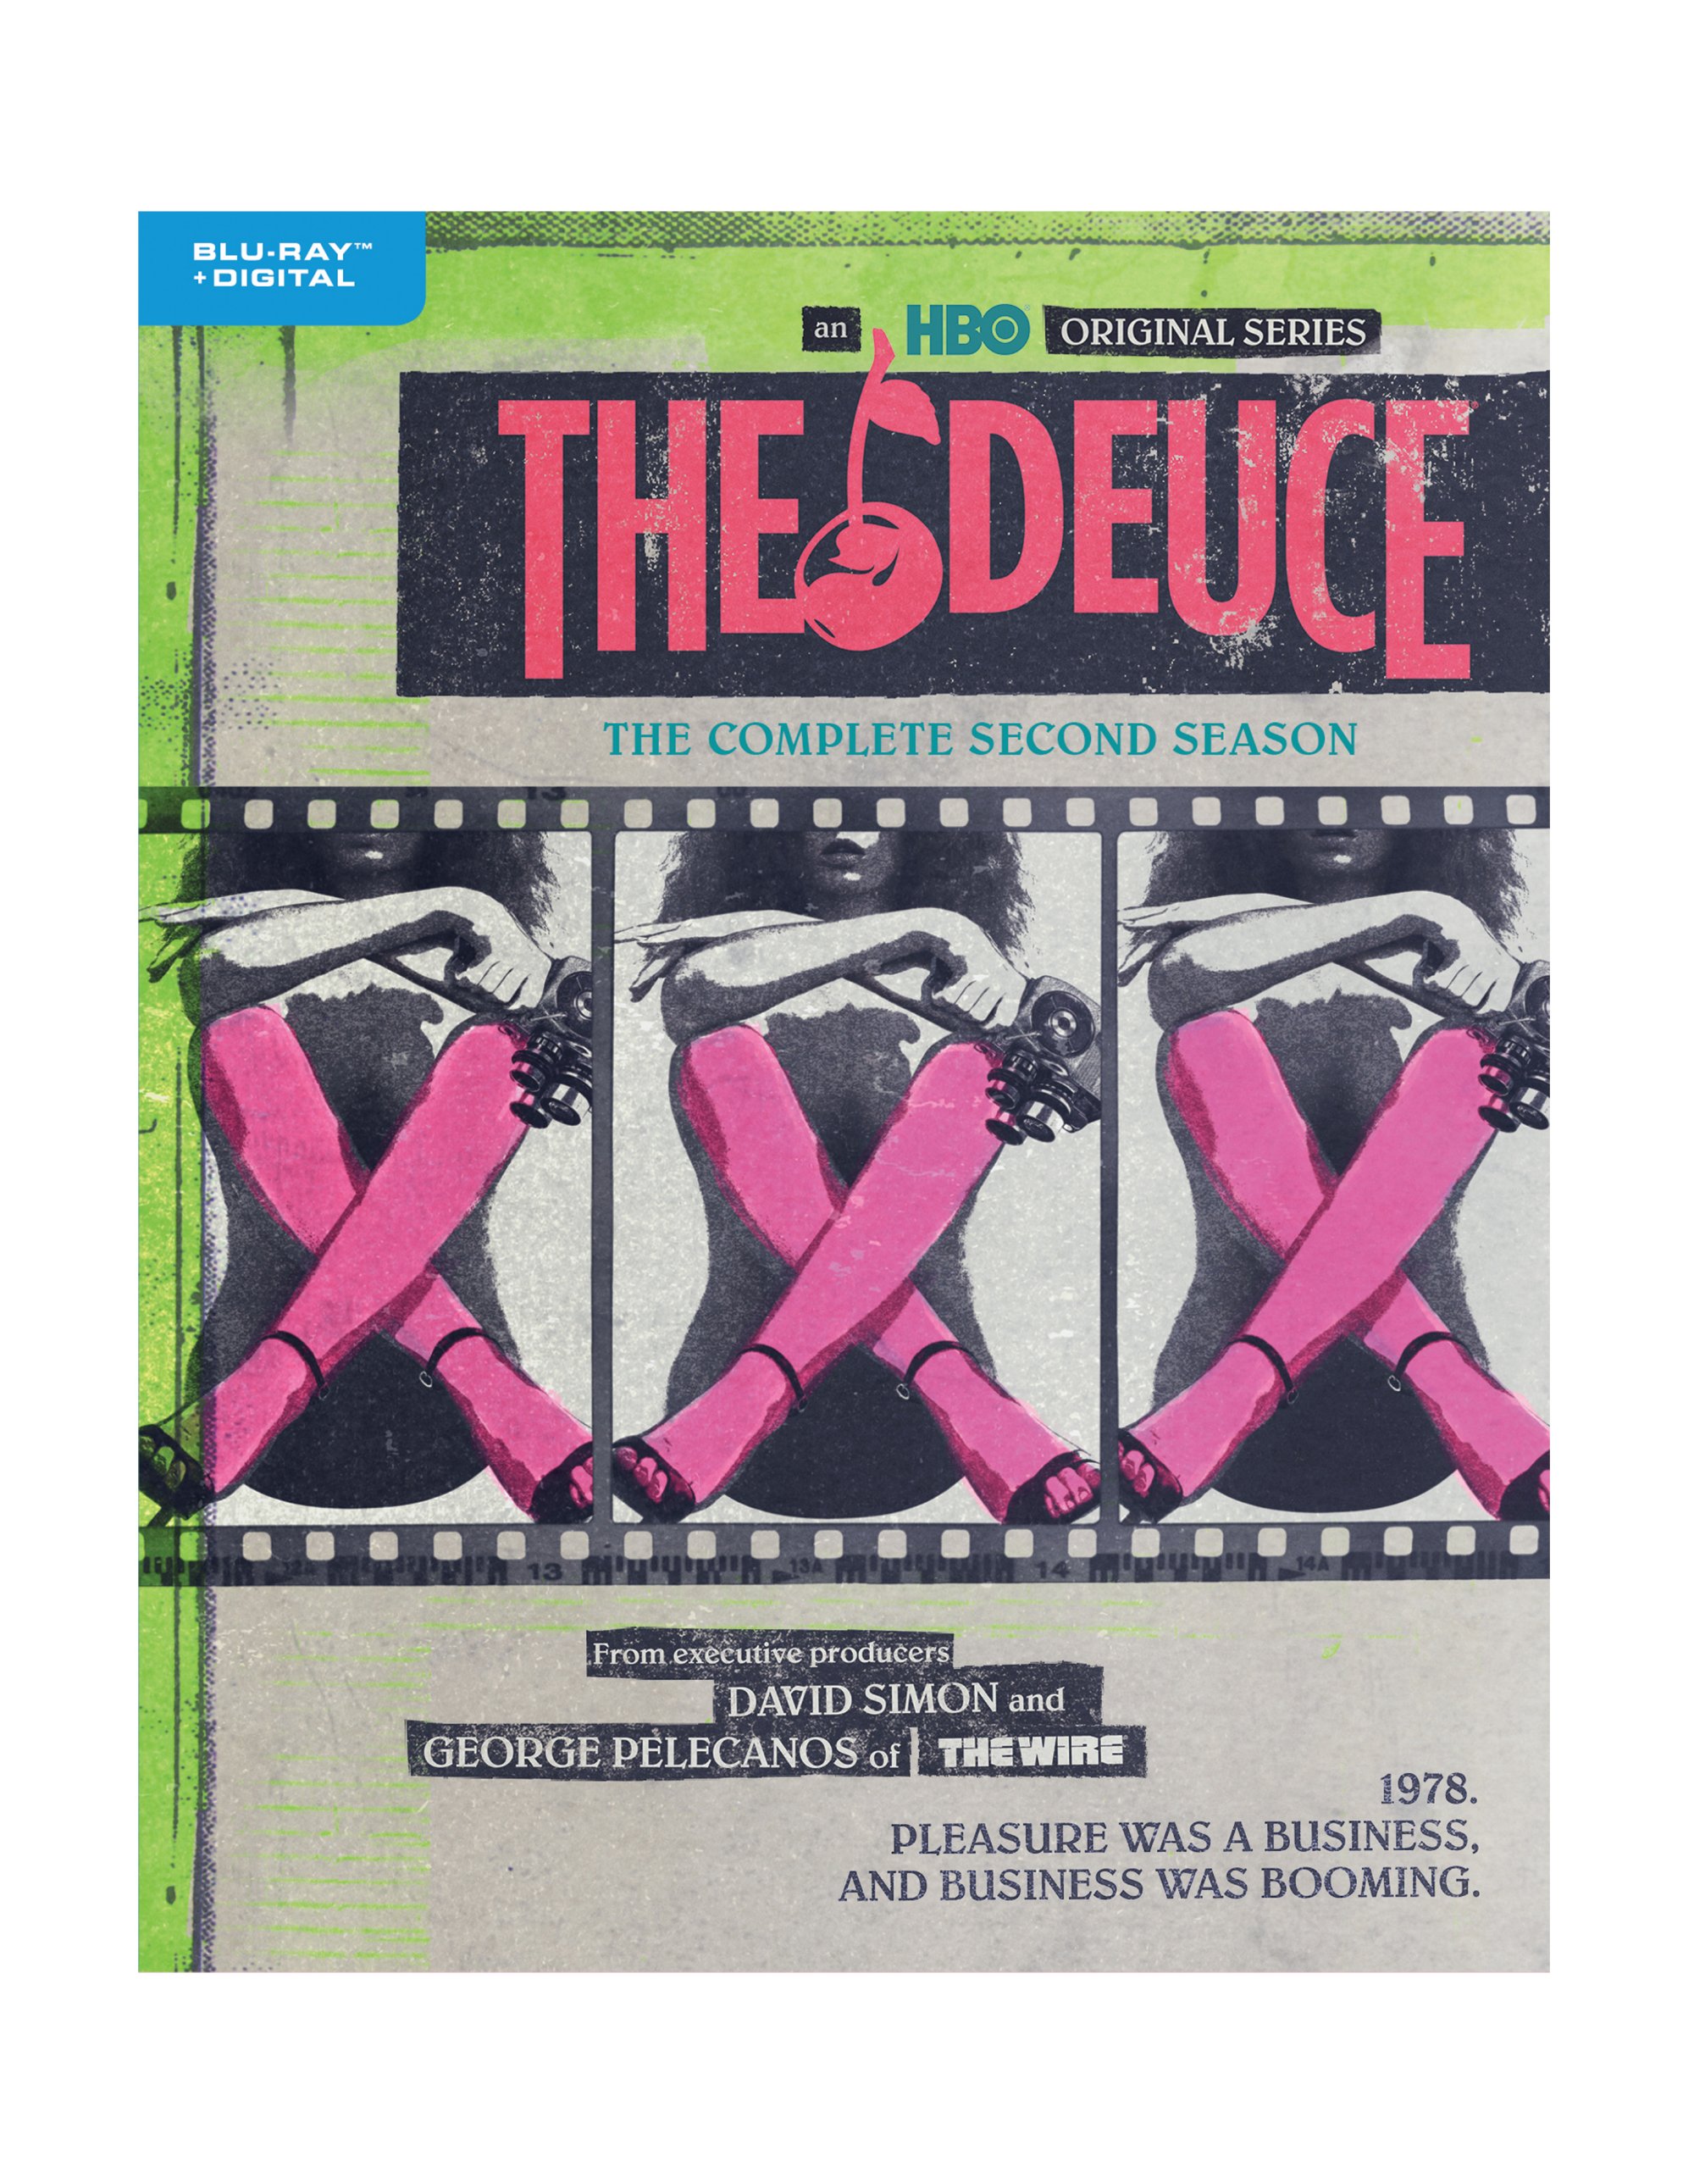 The Deuce: The Complete Second Season (Blu-ray + Digital HD) - Blu-ray [ 2018 ]  - Drama Television On Blu-ray - TV Shows On GRUV